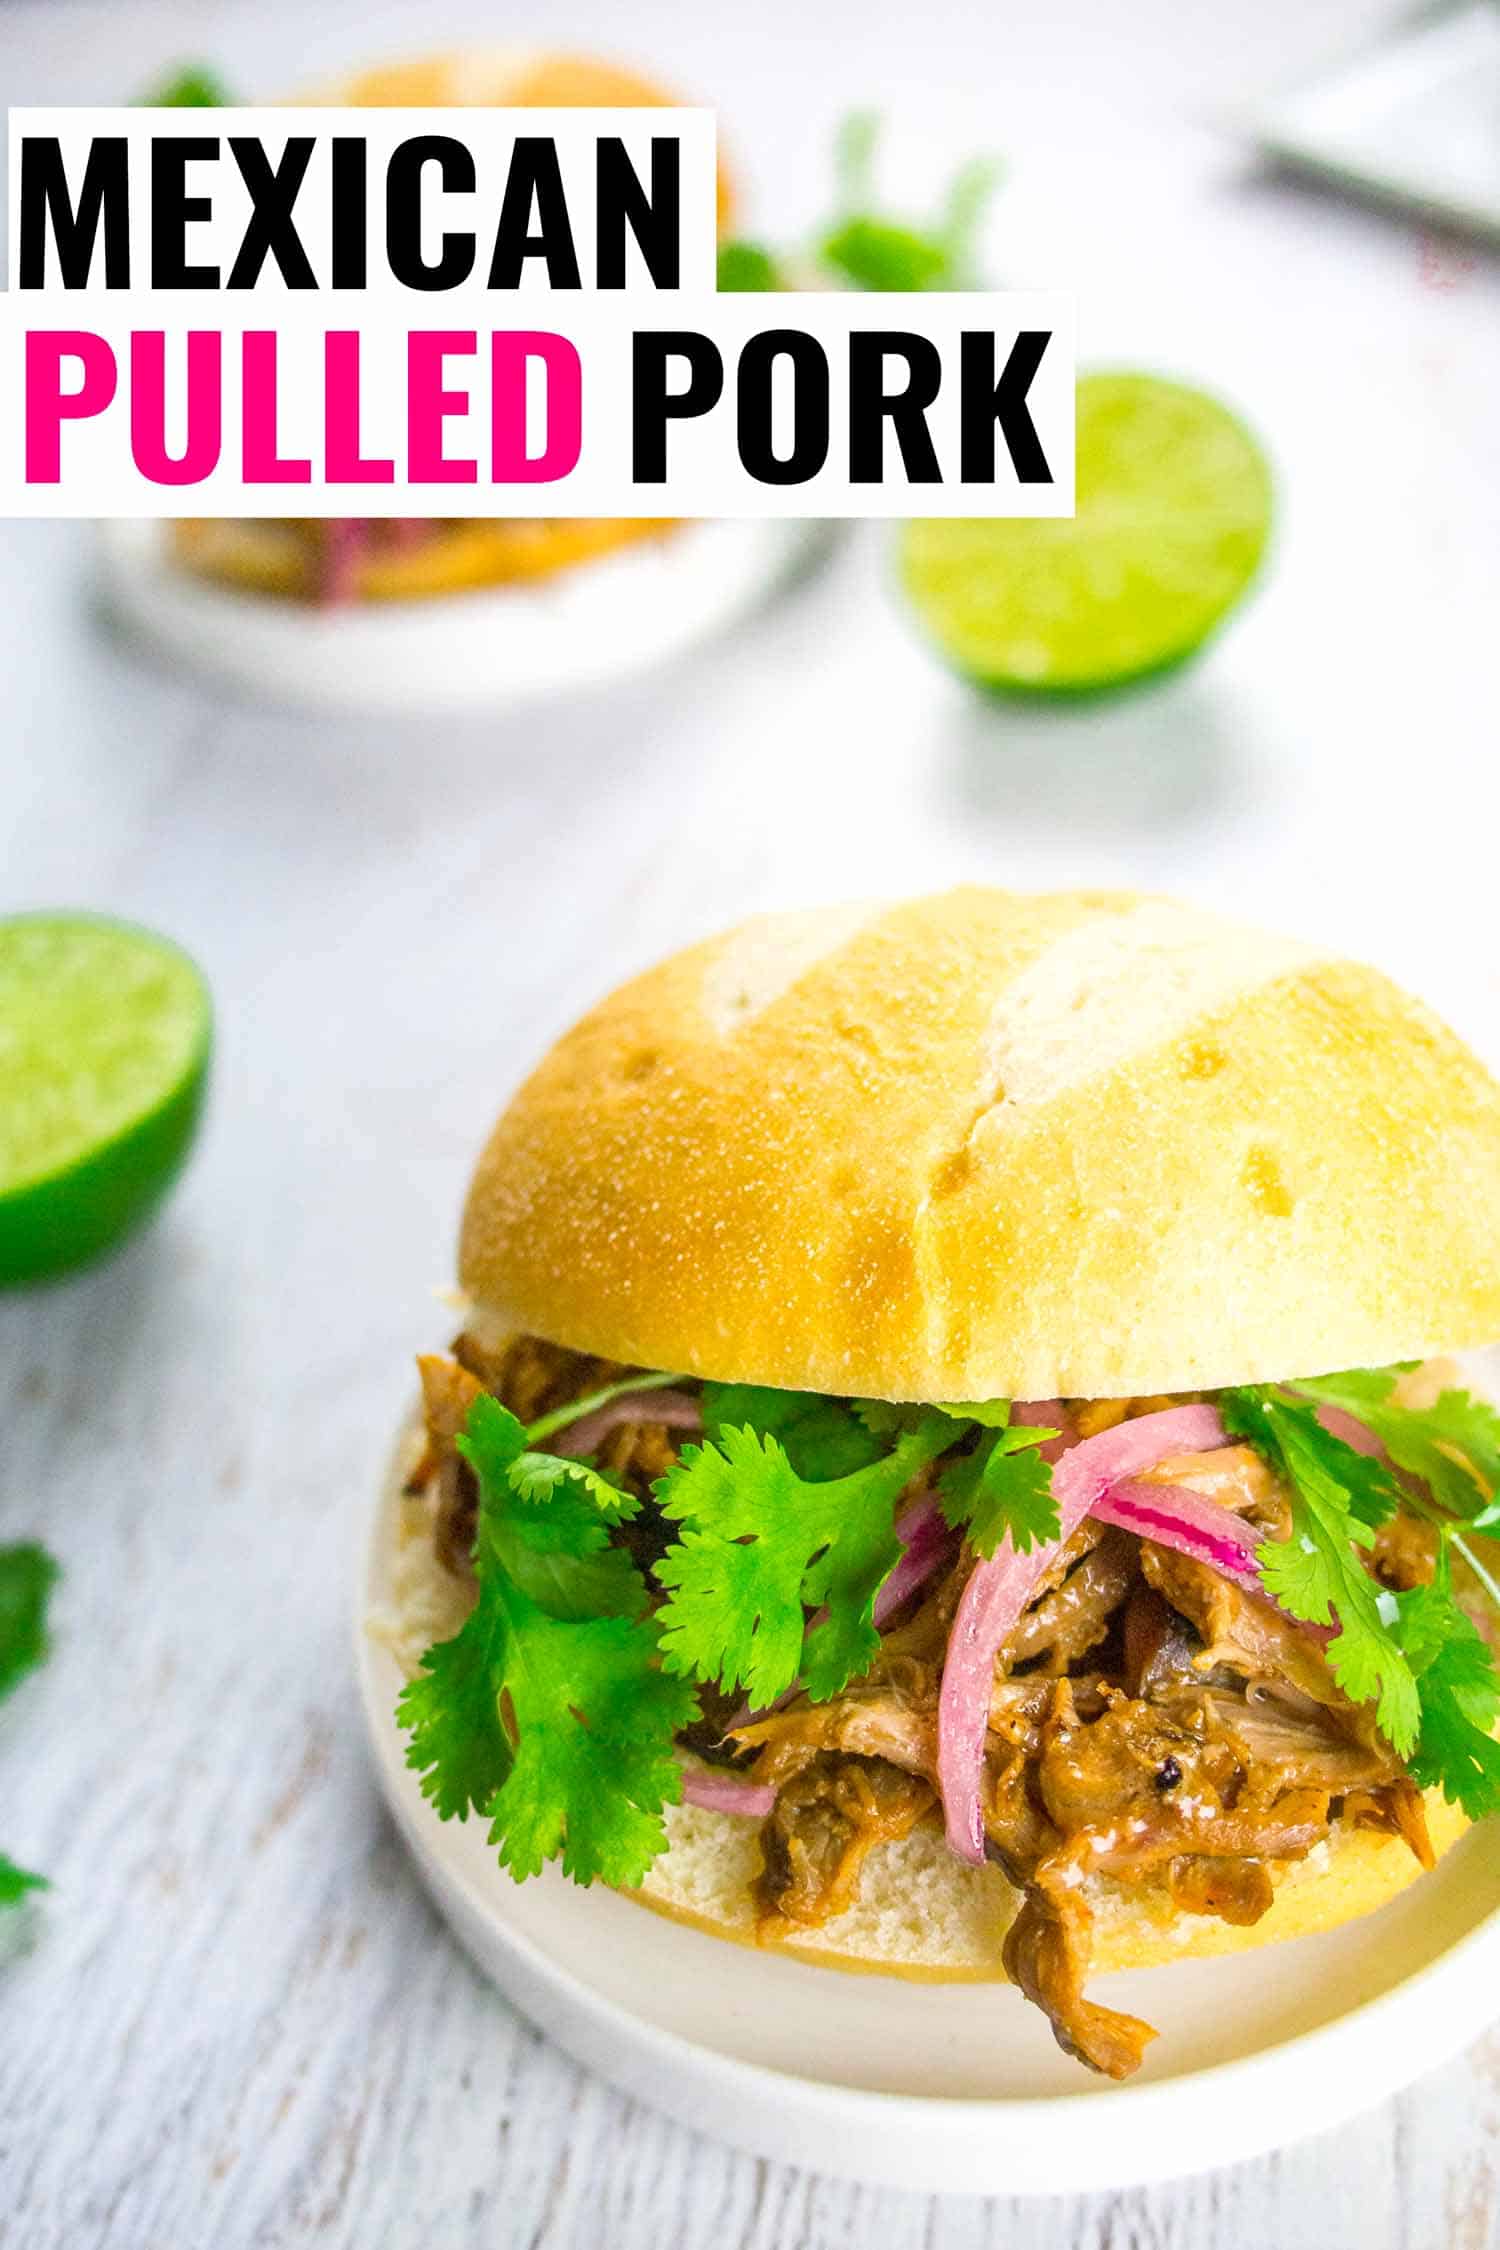 Mexican pulled pork also known as cochinita pibil in Mexico. Served on a bun.